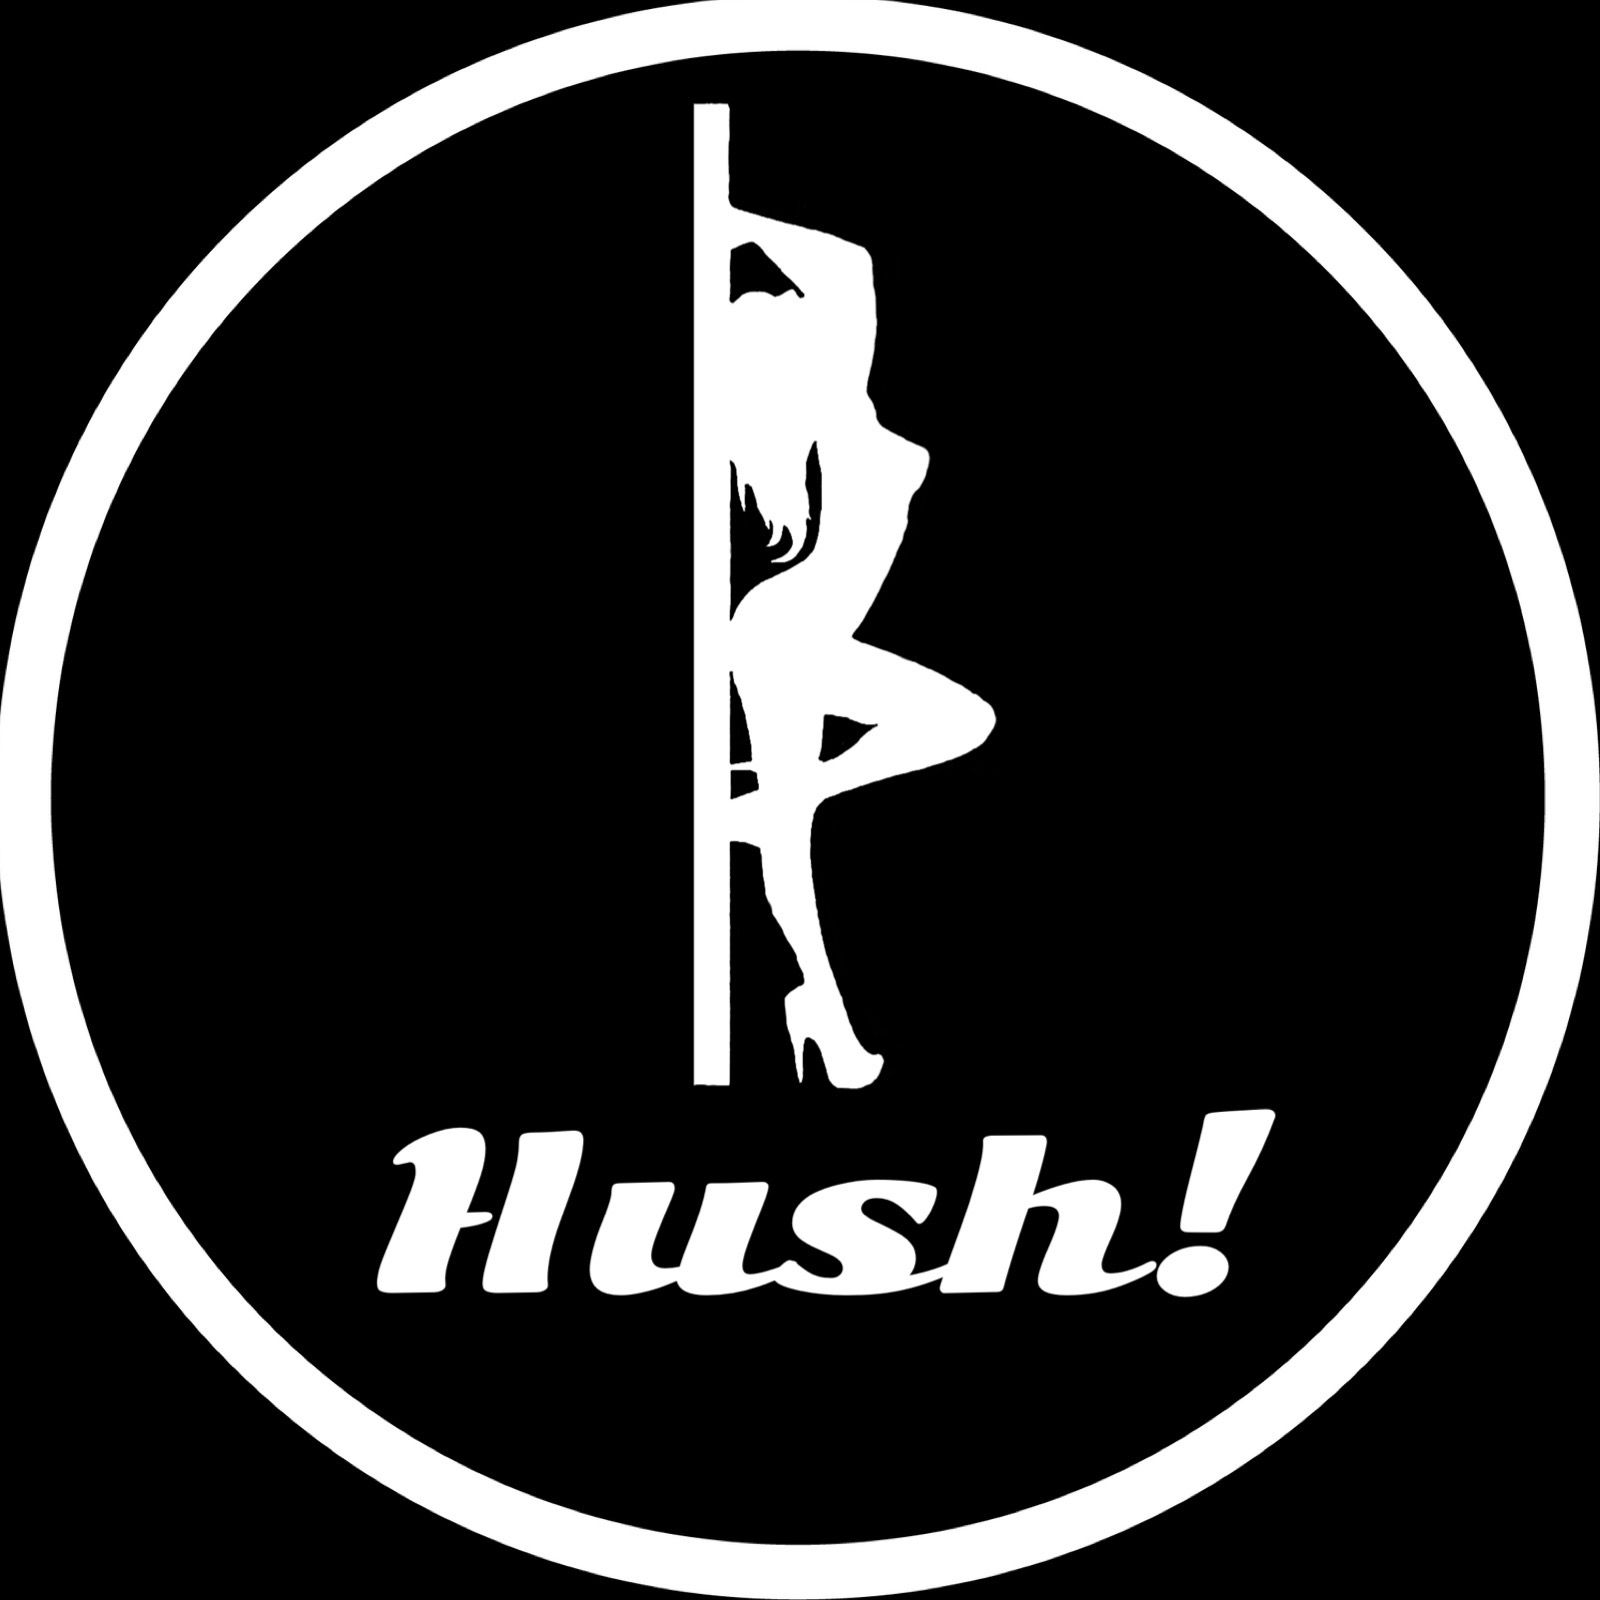 Hush! - Hush! Vol. 59- One on One with Candice Harper